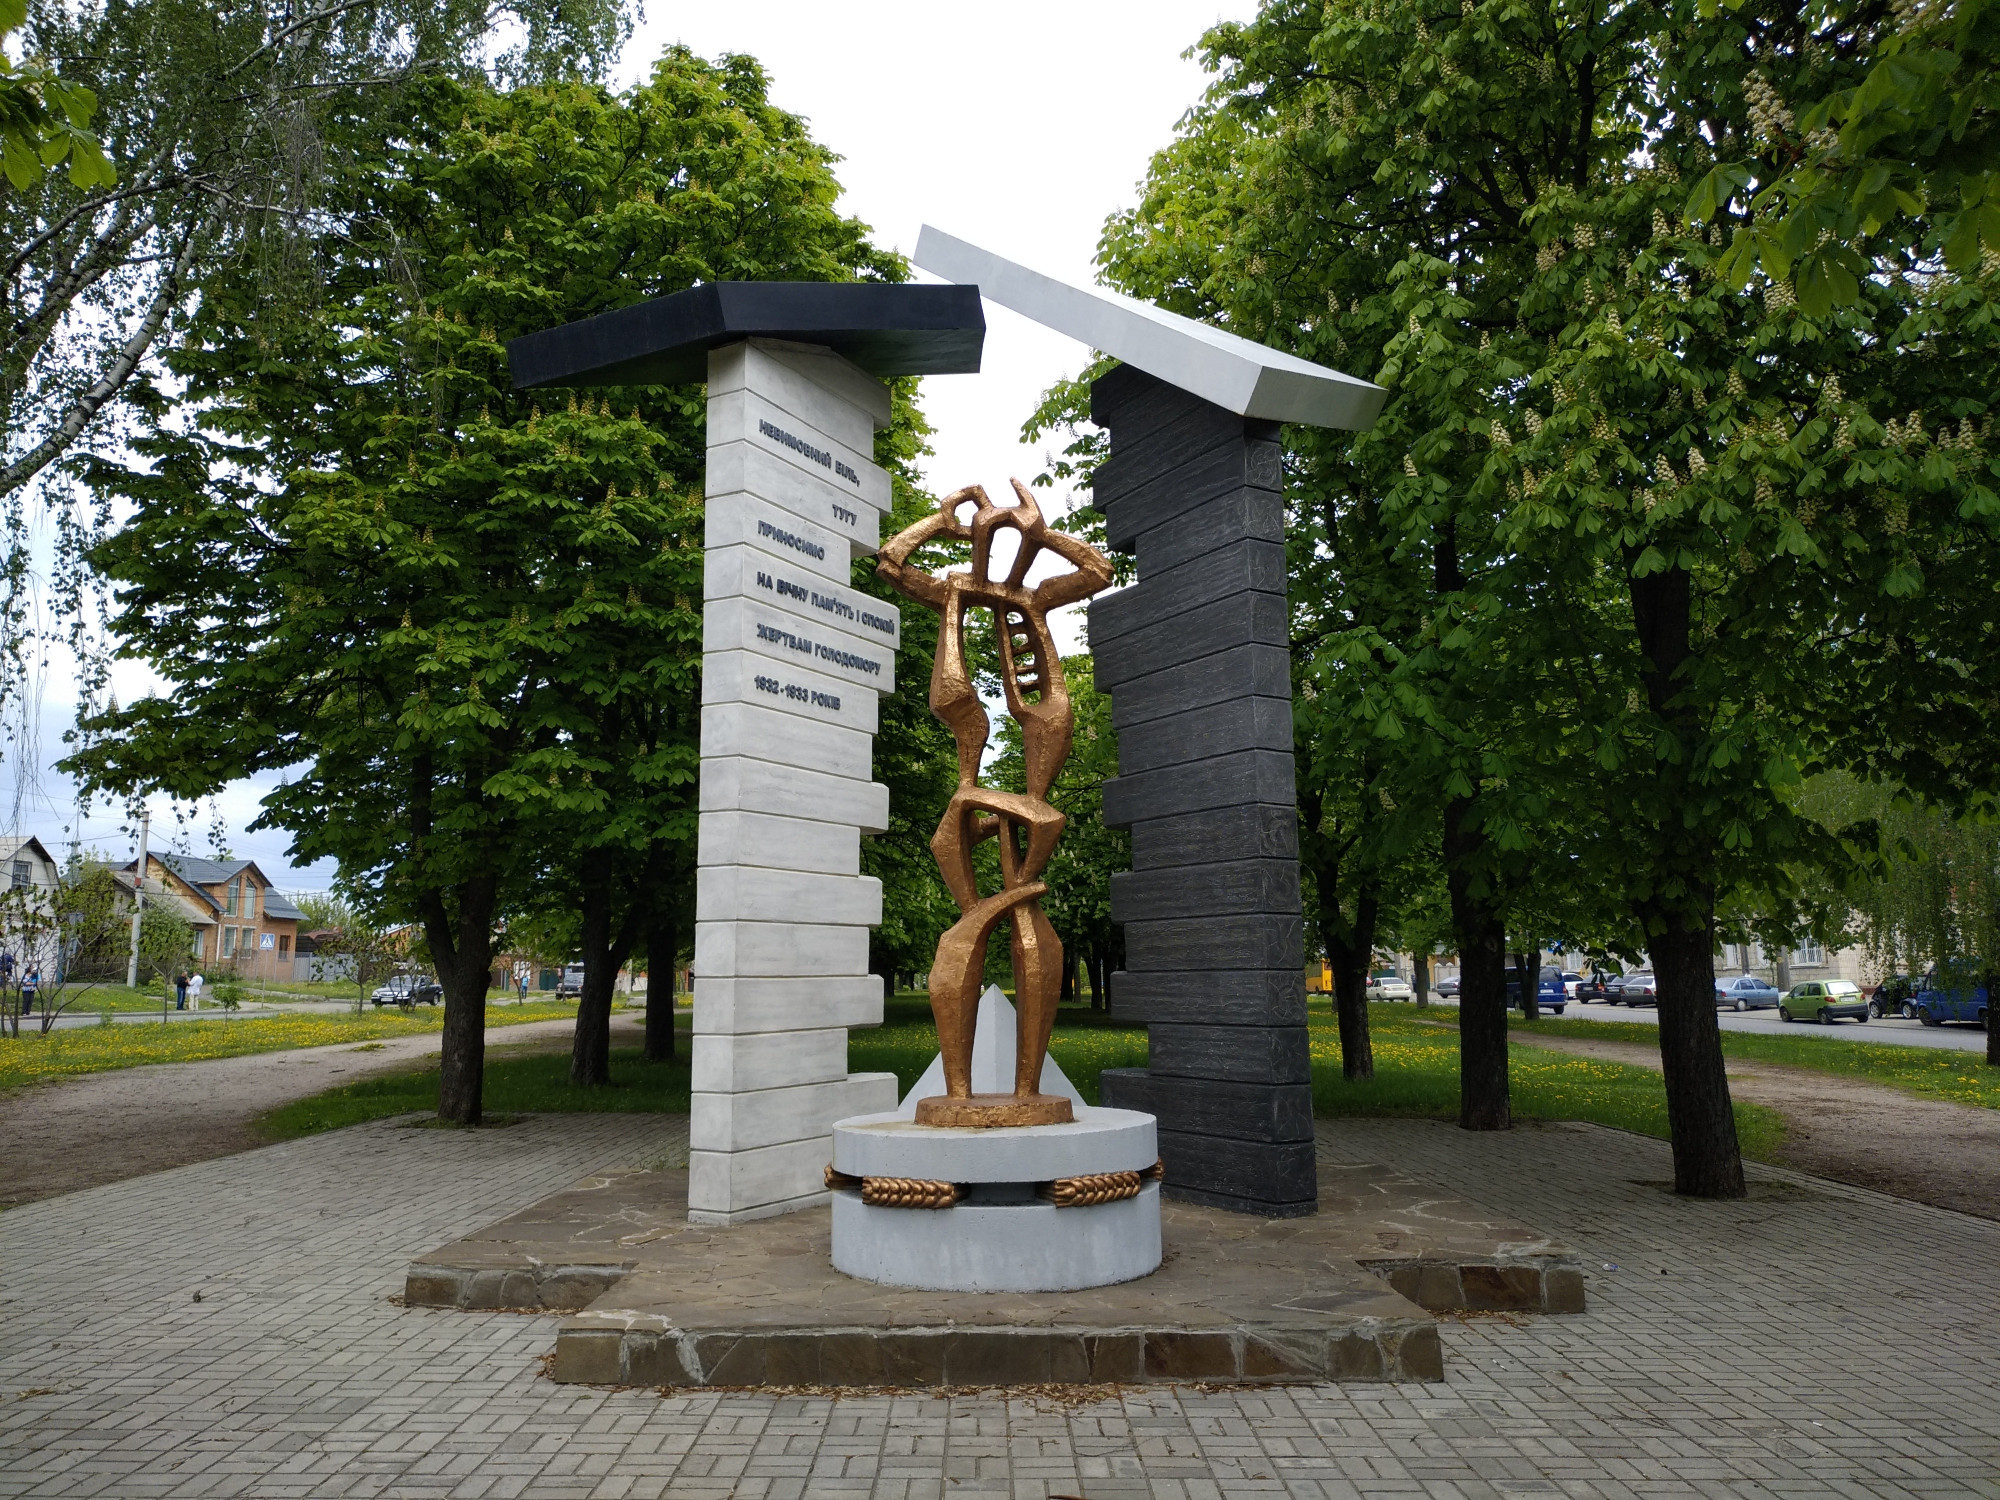 Monument to the victims of the Holodomor (Sumy, Ukraine)<br/> <br/>
The Holodomor was a man-made famine in Soviet Ukraine from 1932 to 1933 that killed millions of Ukrainians. 